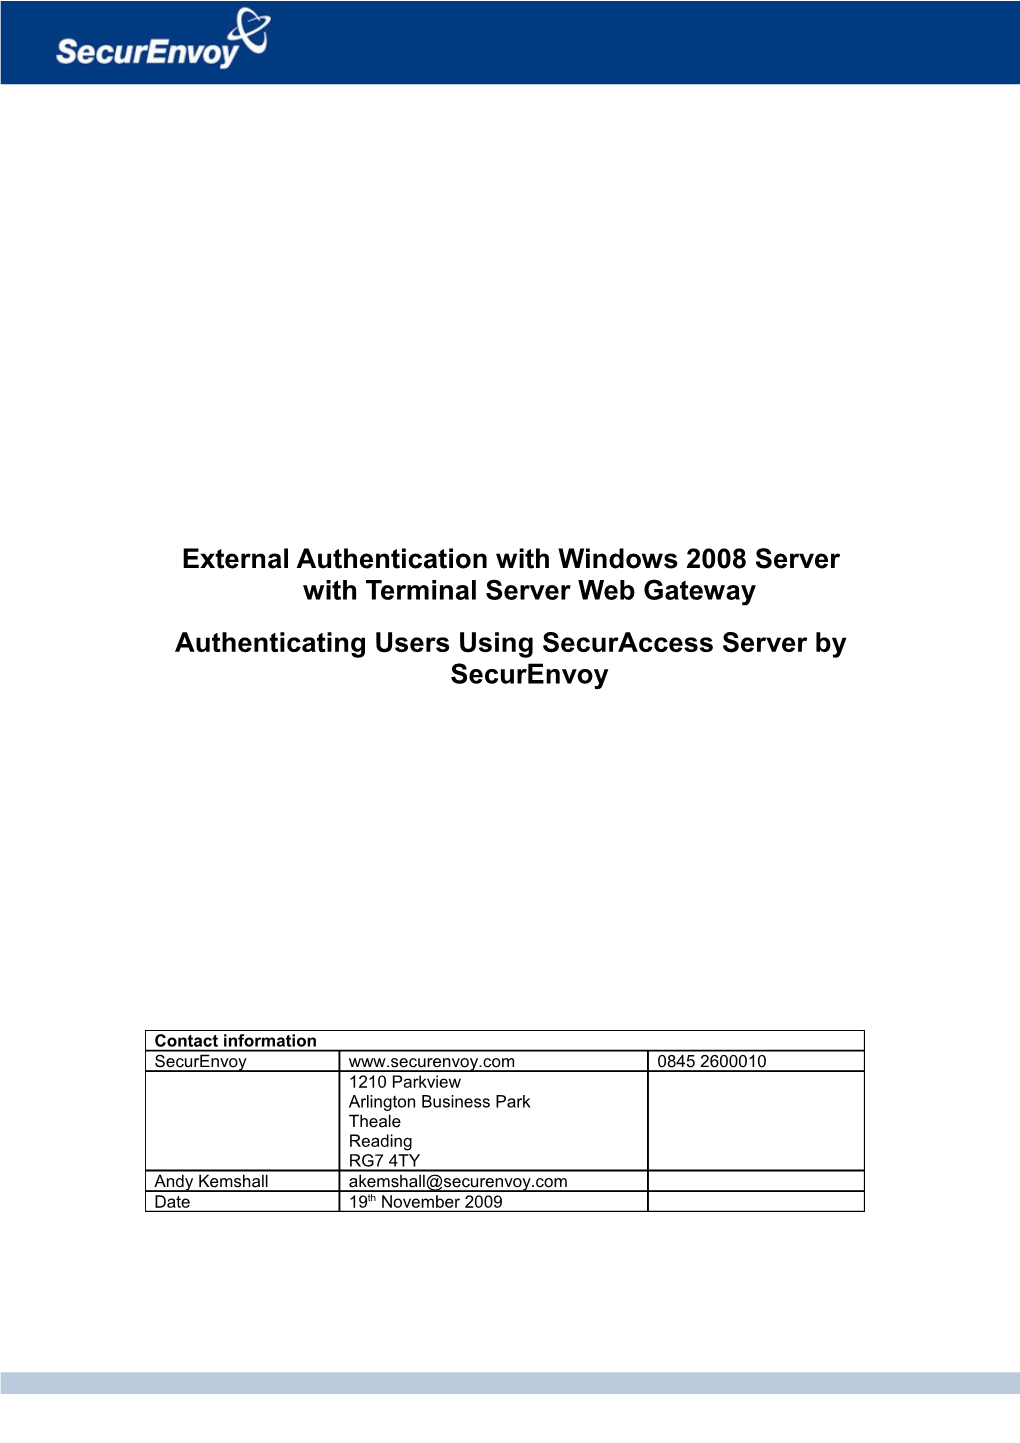 External Authentication with Windows 2008 Server with Terminal Server Web Gateway